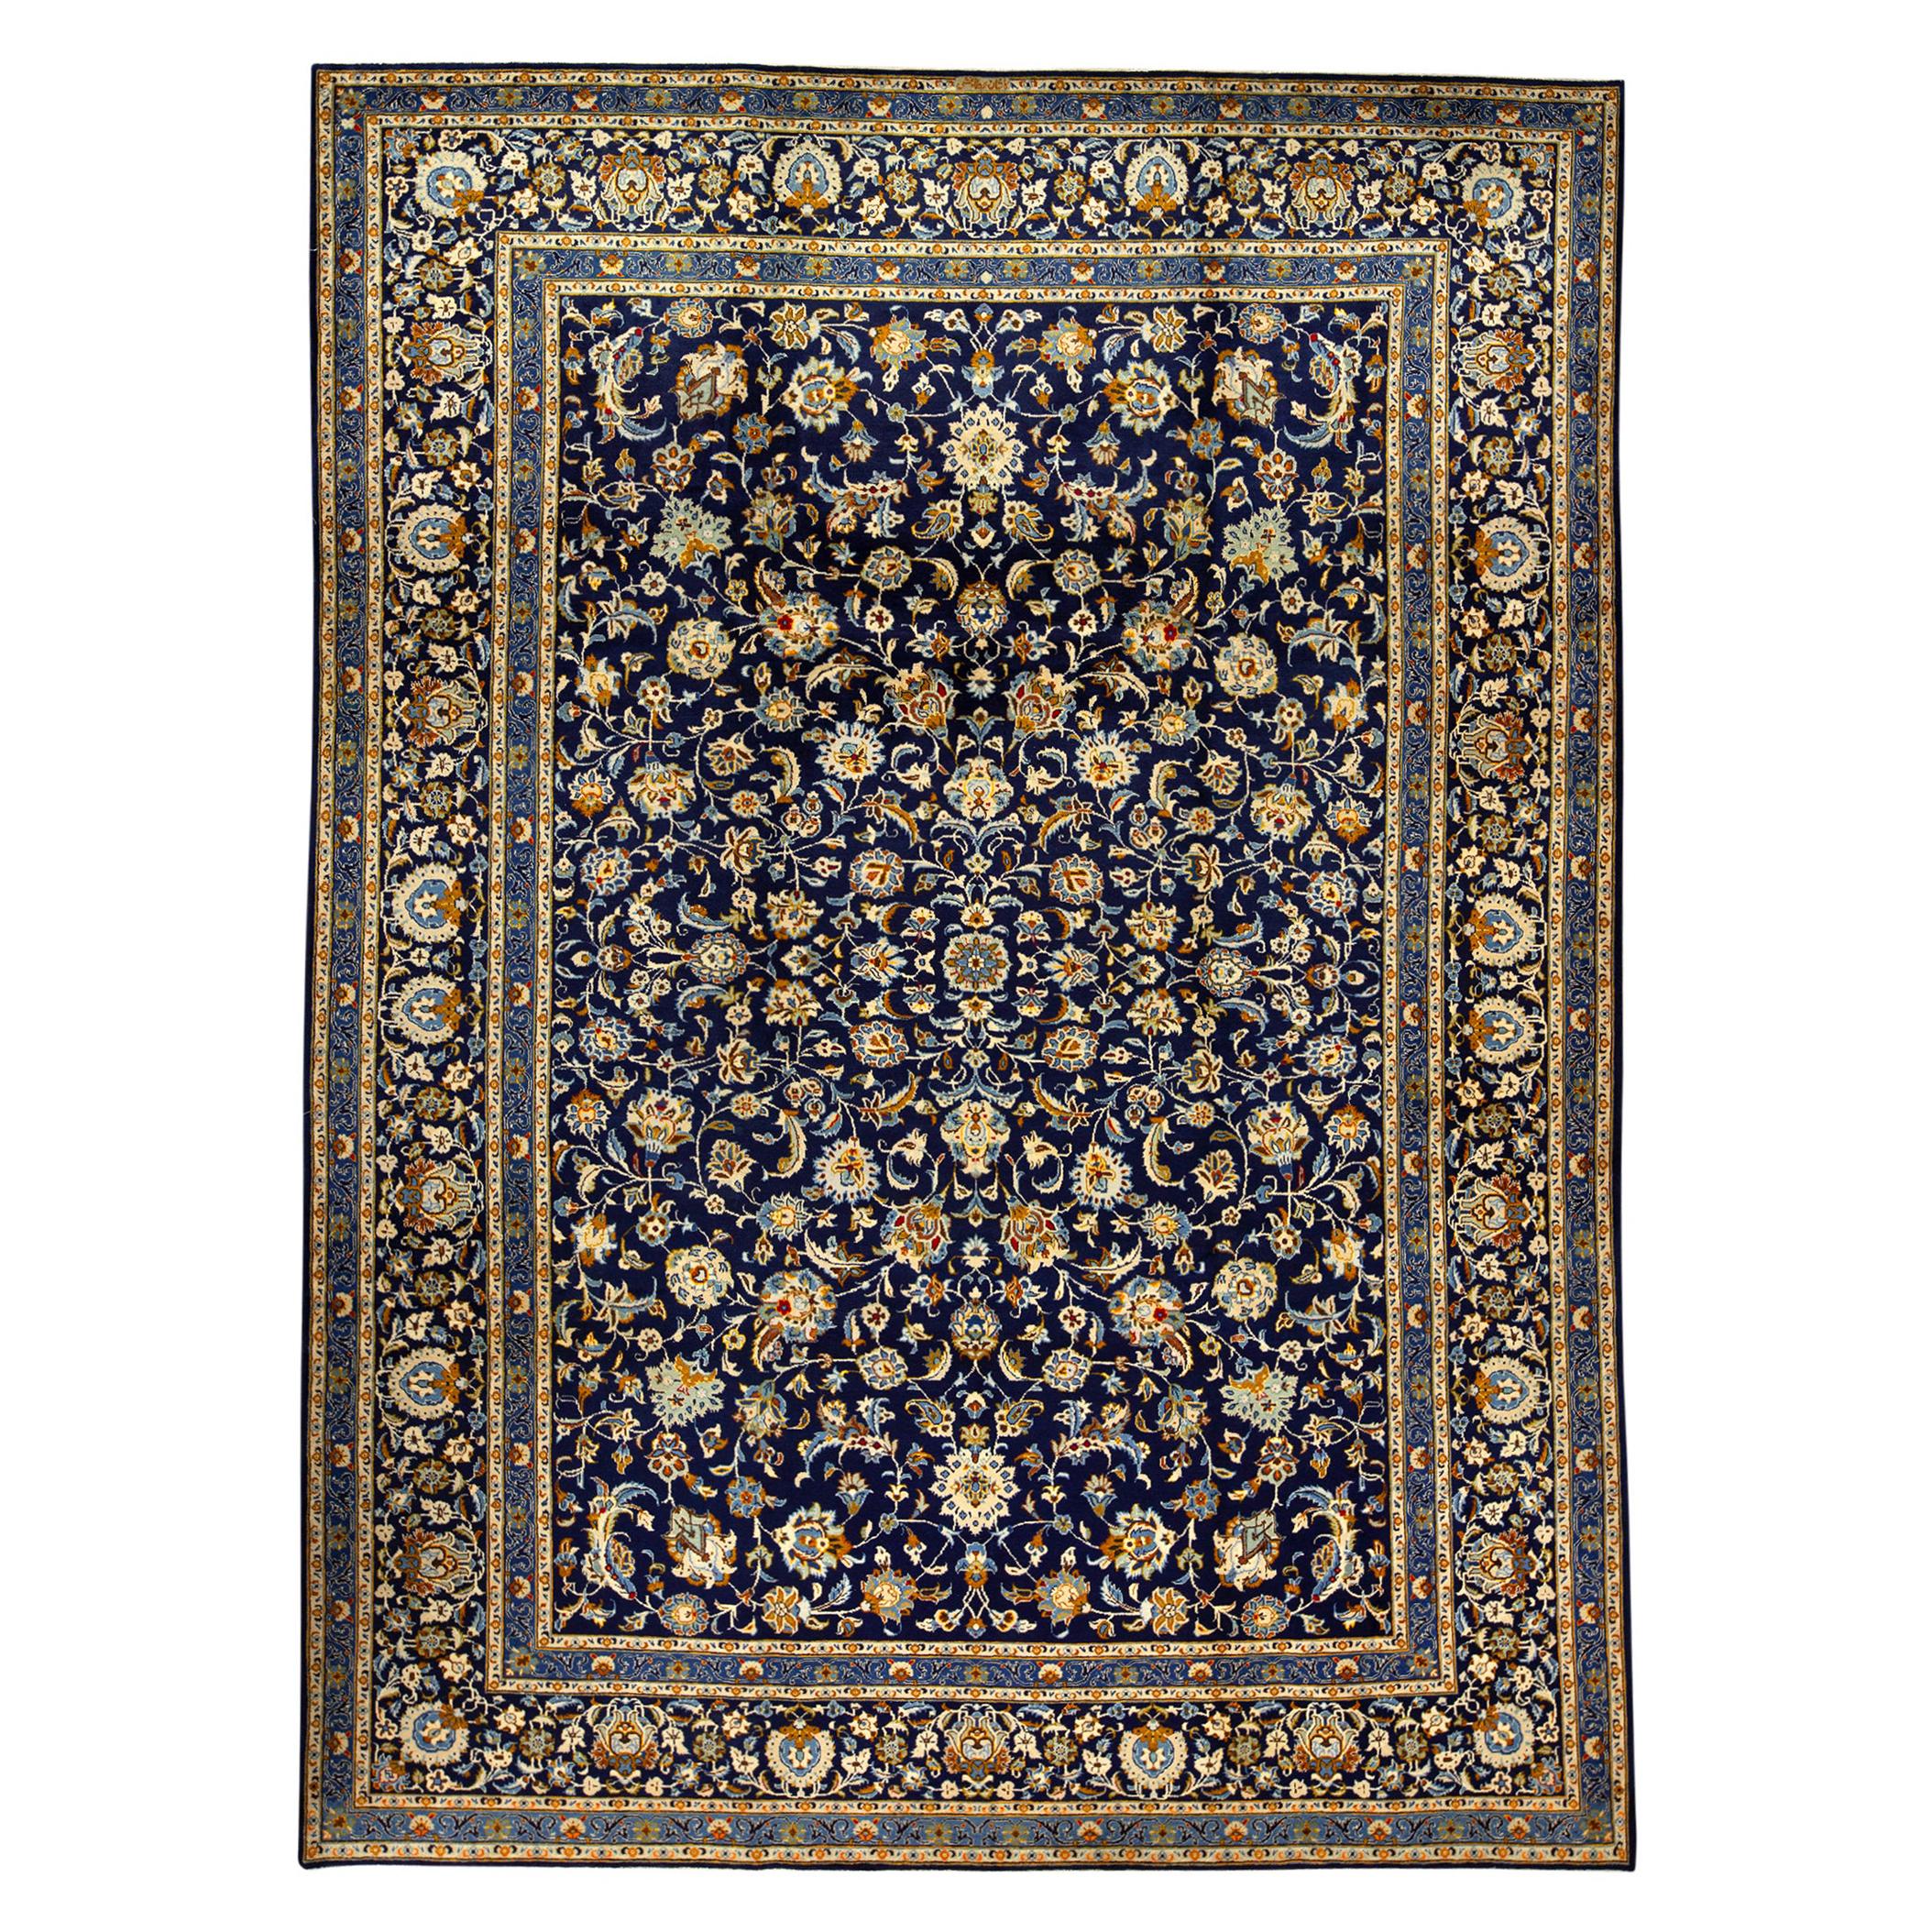   Antique Persian Fine Traditional Handwoven Luxury Wool Navy Rug For Sale